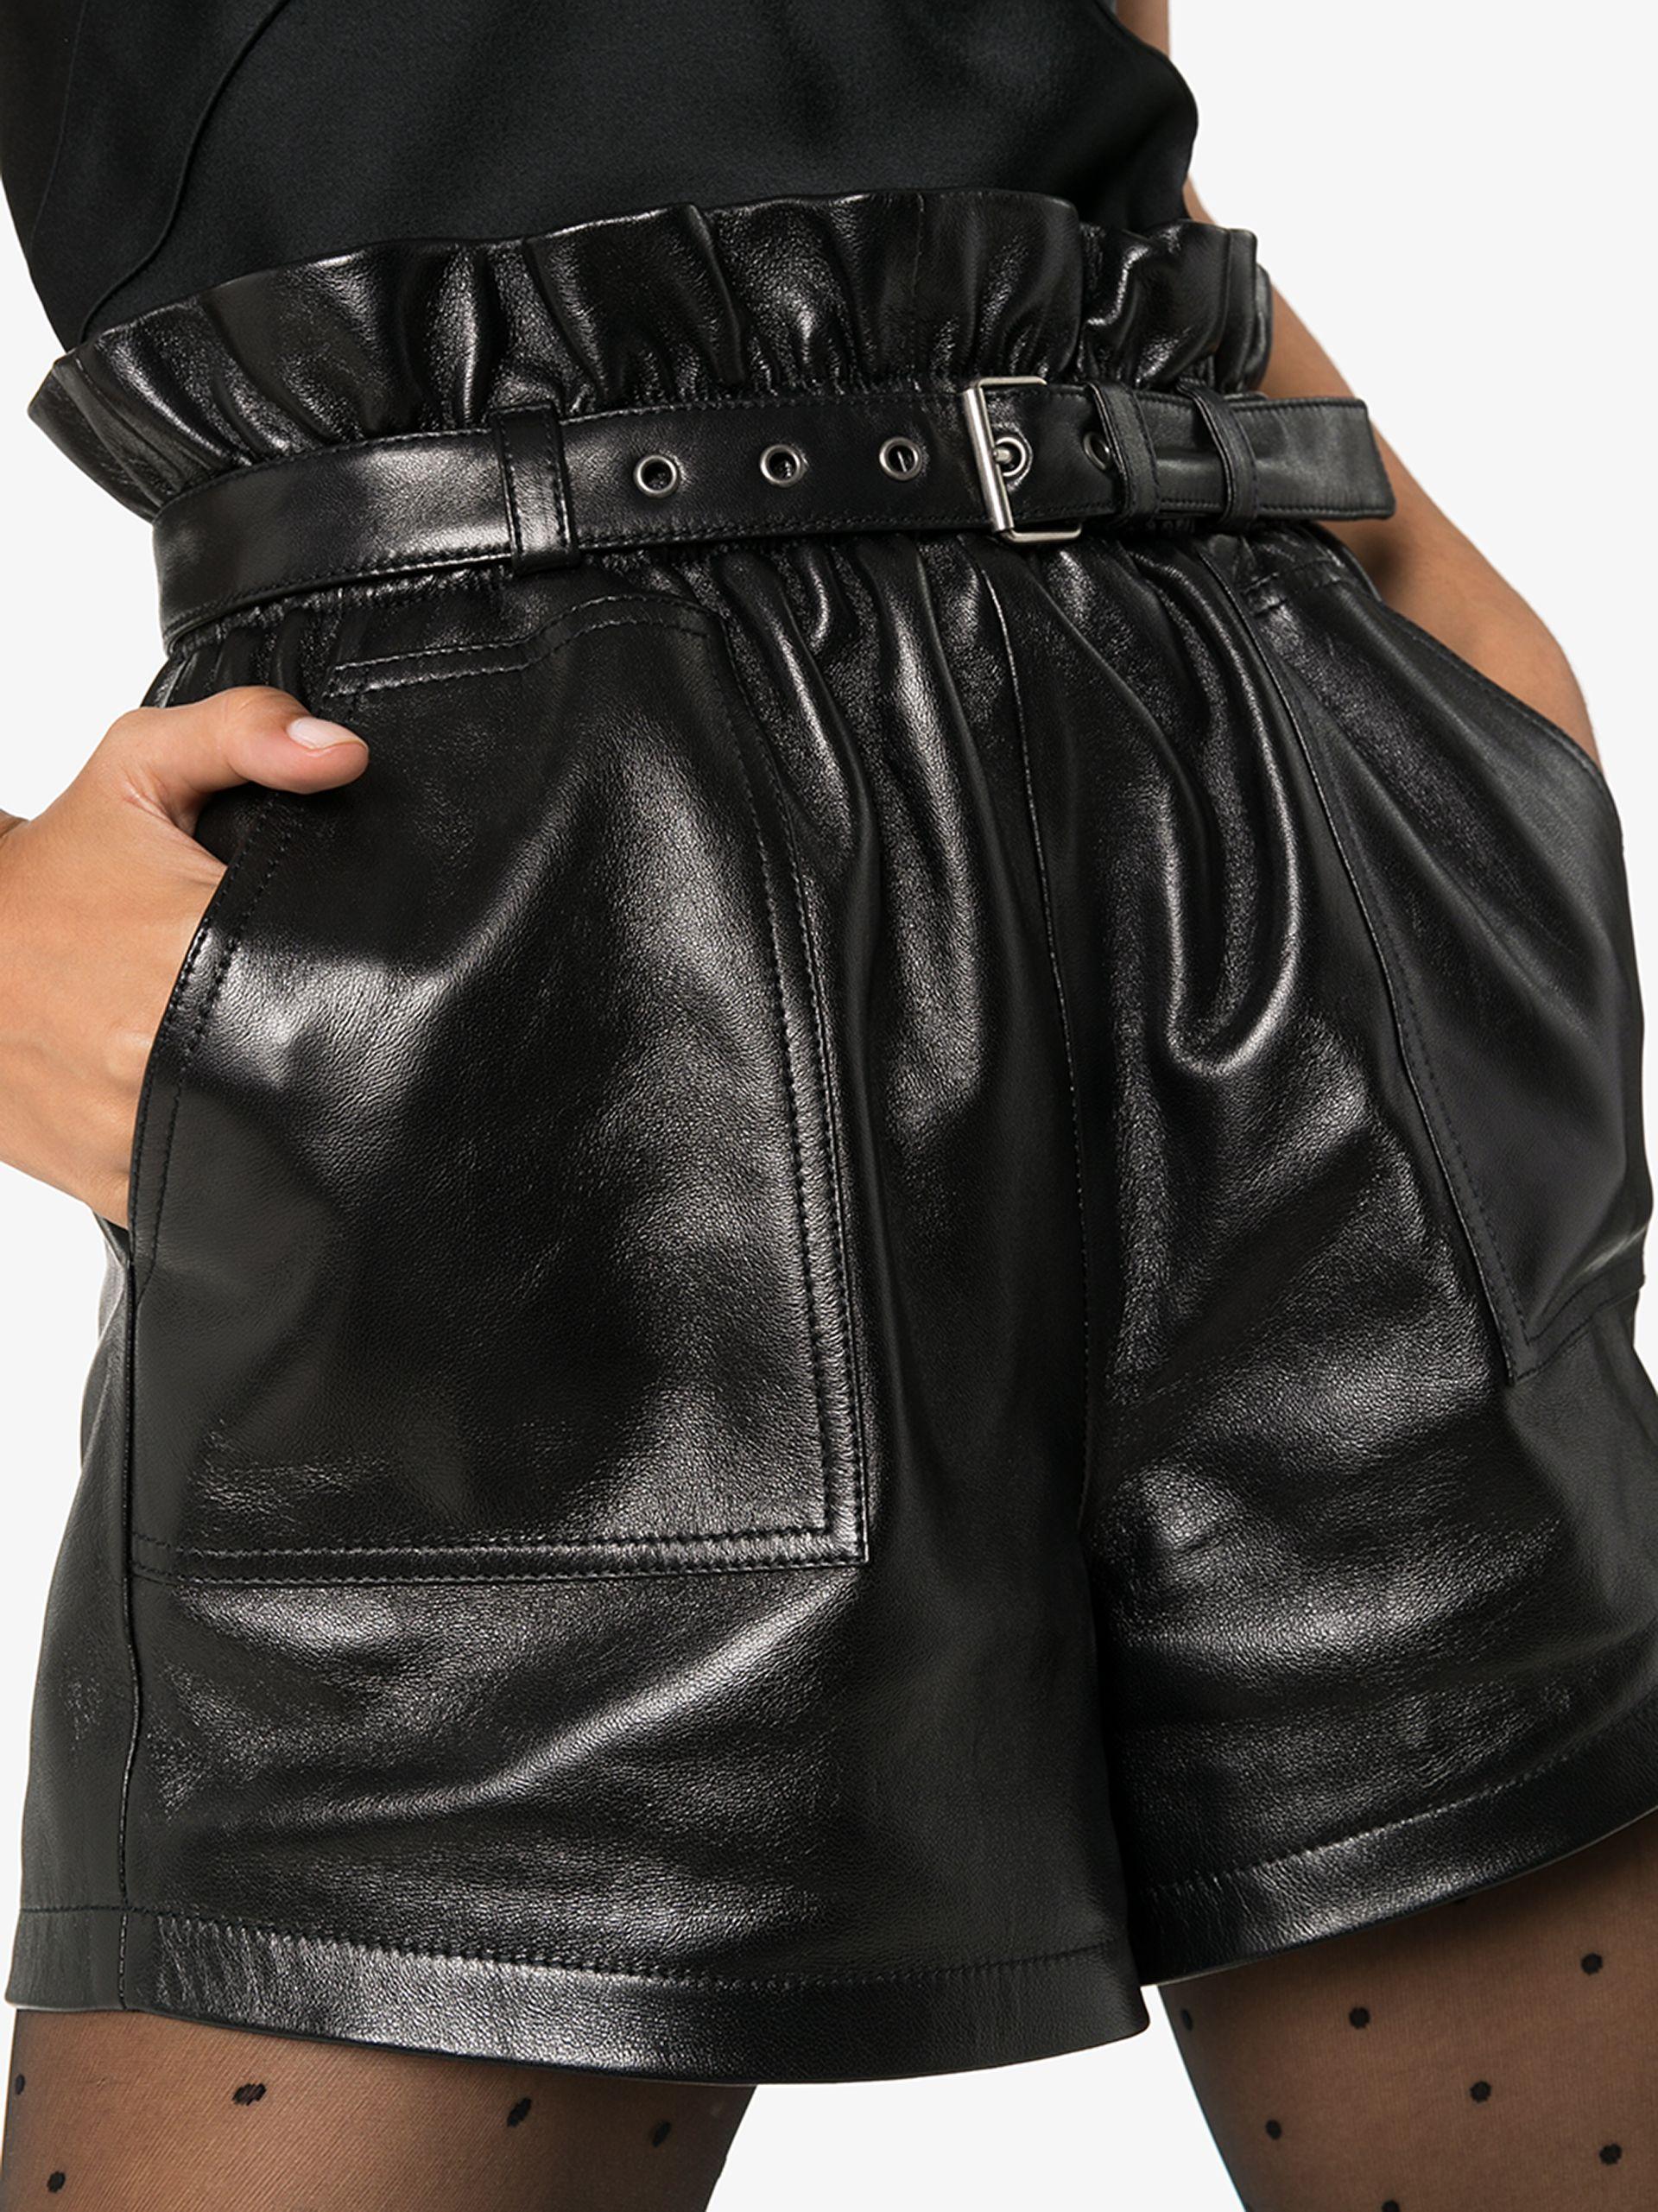 Women's Saint Laurent Black High Waisted Belted Leather Shorts Size 36 For Sale